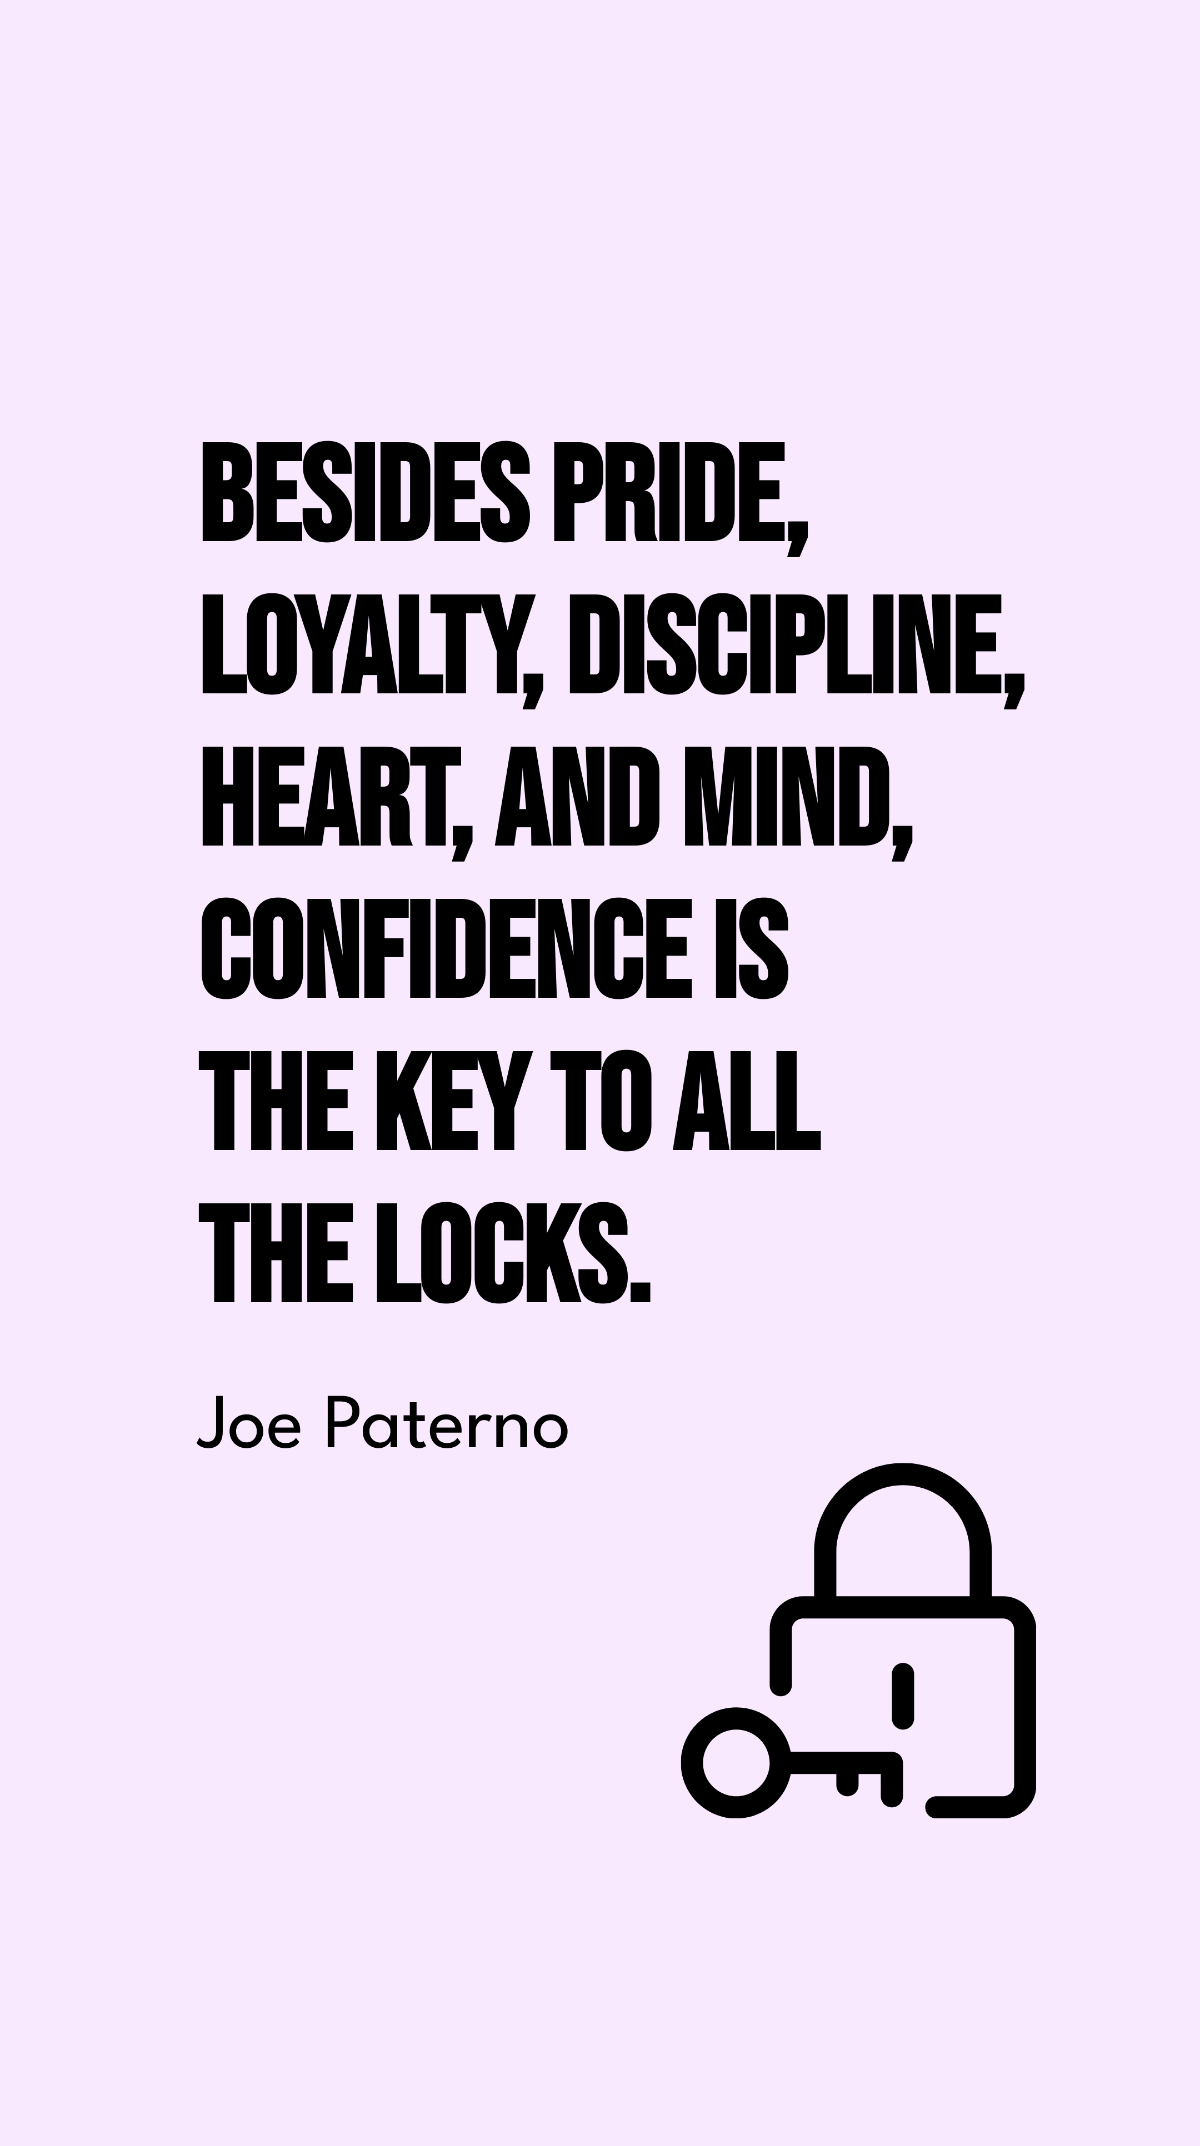 Free Joe Paterno - Besides pride, loyalty, discipline, heart, and mind, confidence is the key to all the locks. Template